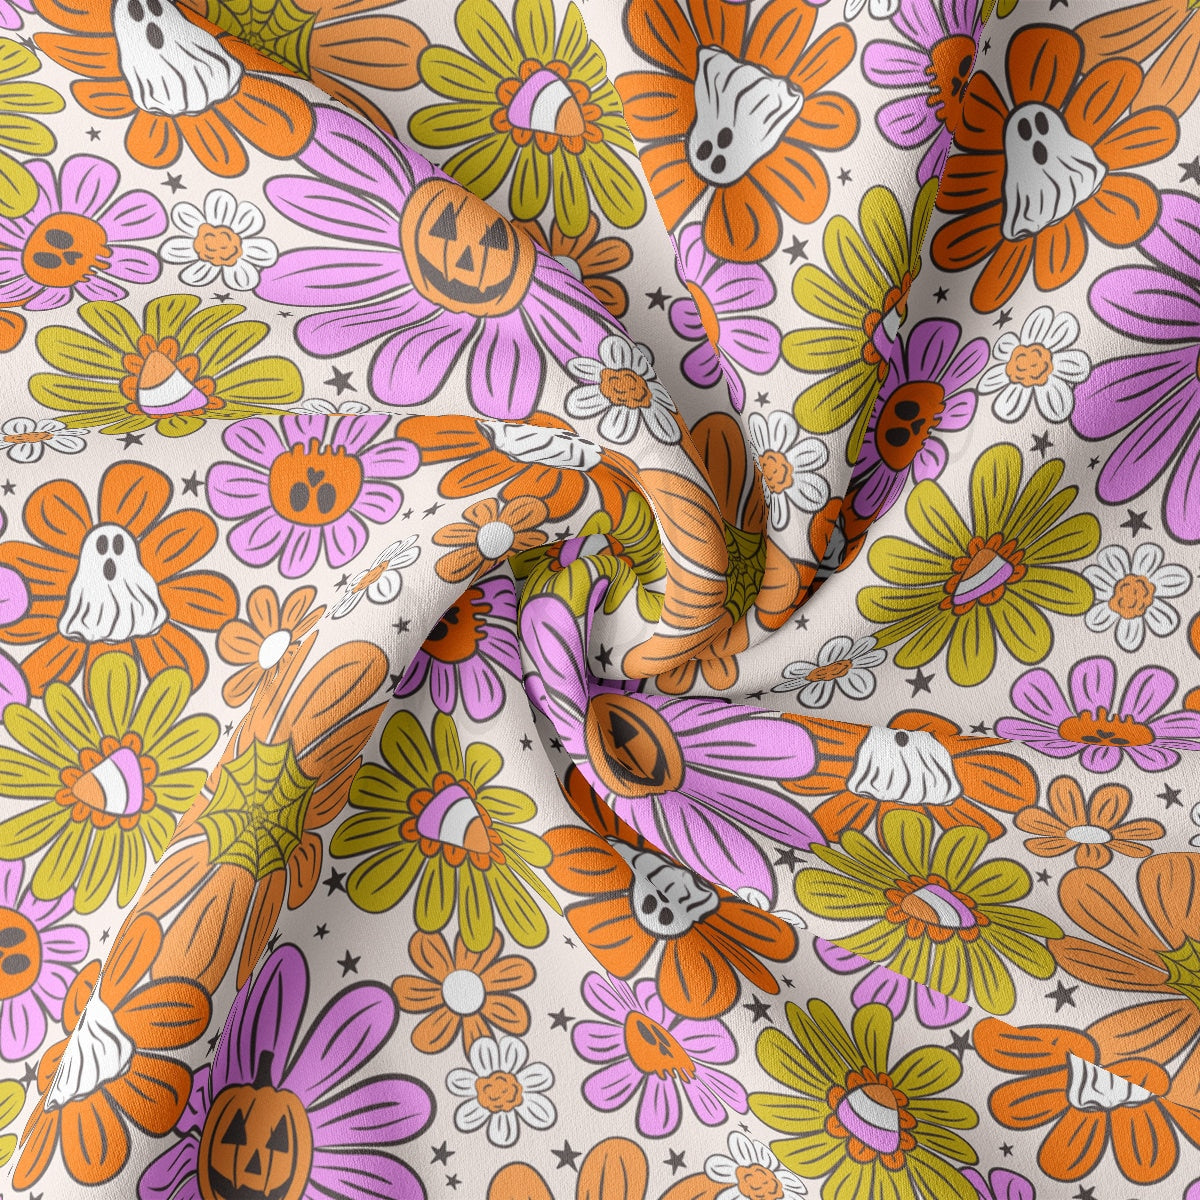 DBP Fabric Double Brushed Polyester Fabric DBP1882 halloween